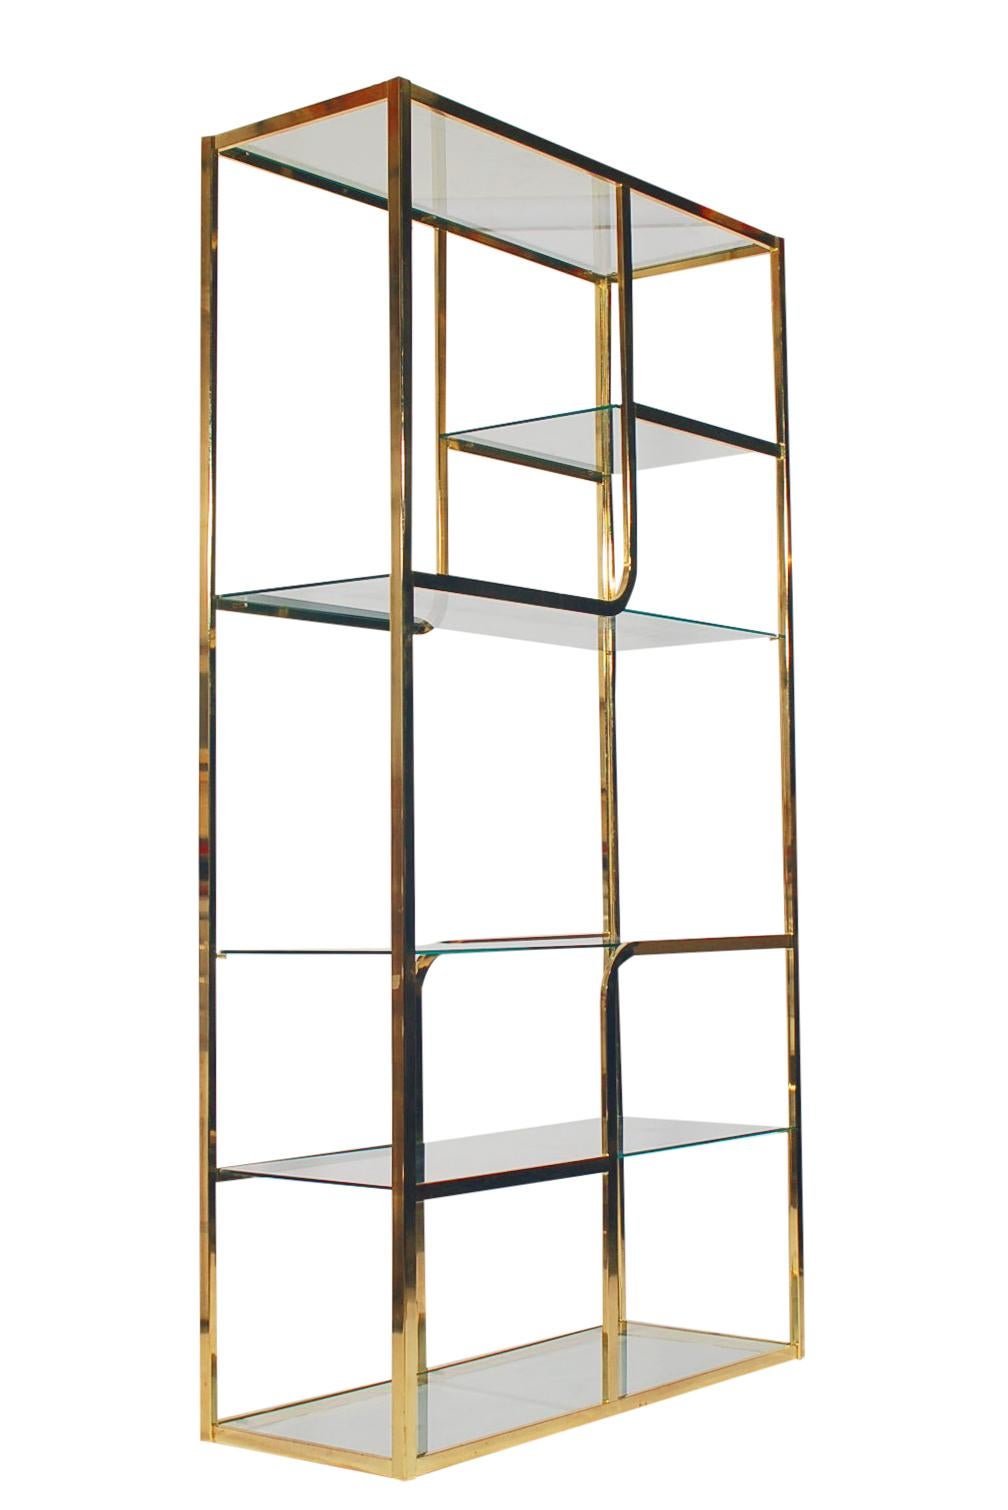 North American Mid-Century Modern Brass & Glass Étagère or Wall Unit after Milo Baughman